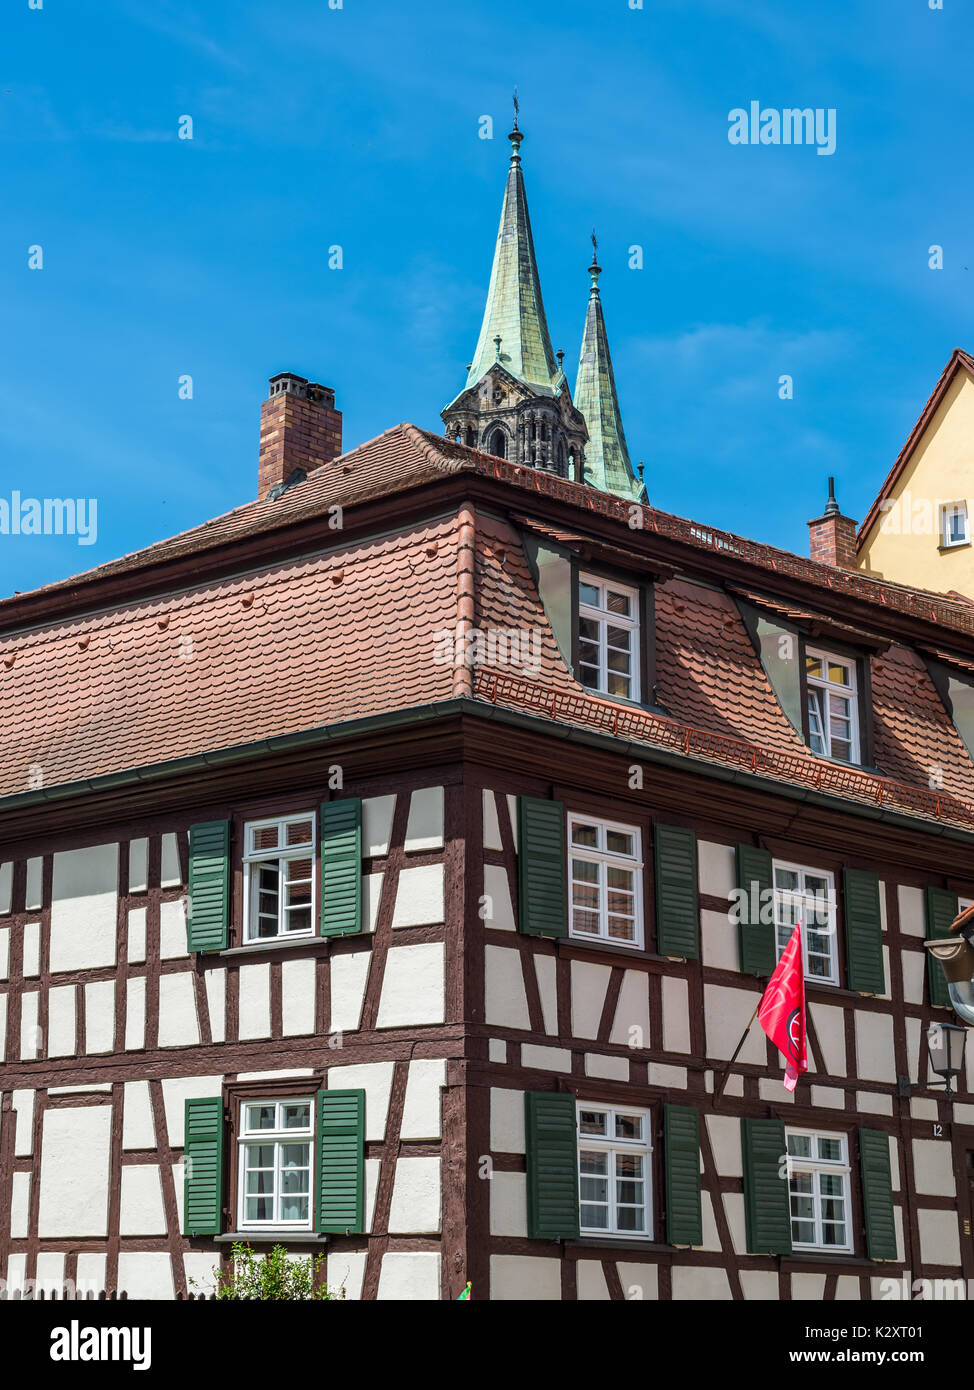 Bamberg, Germany - May 22, 2016: Traditional half-timbered colorful house close-up in Bamberg, Germany. Stock Photo